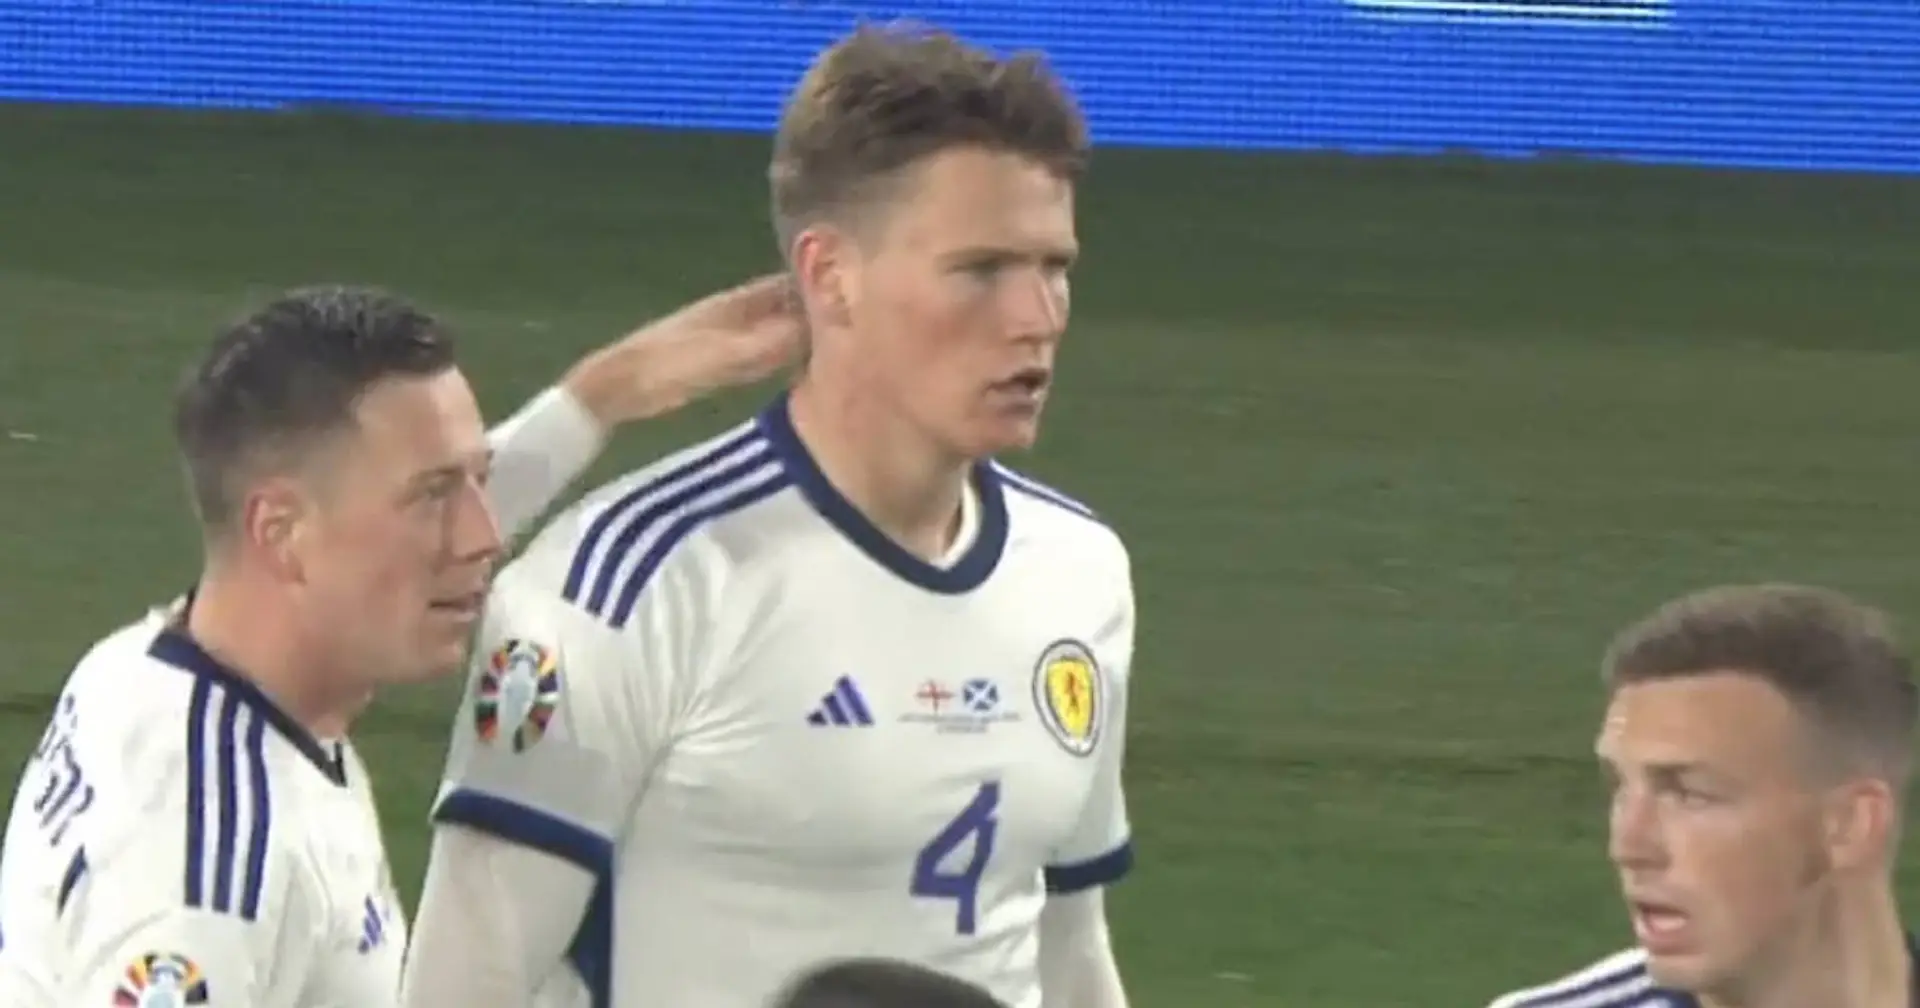 'Best striker in the world': Man United fans react as McTominay scores again for Scotland